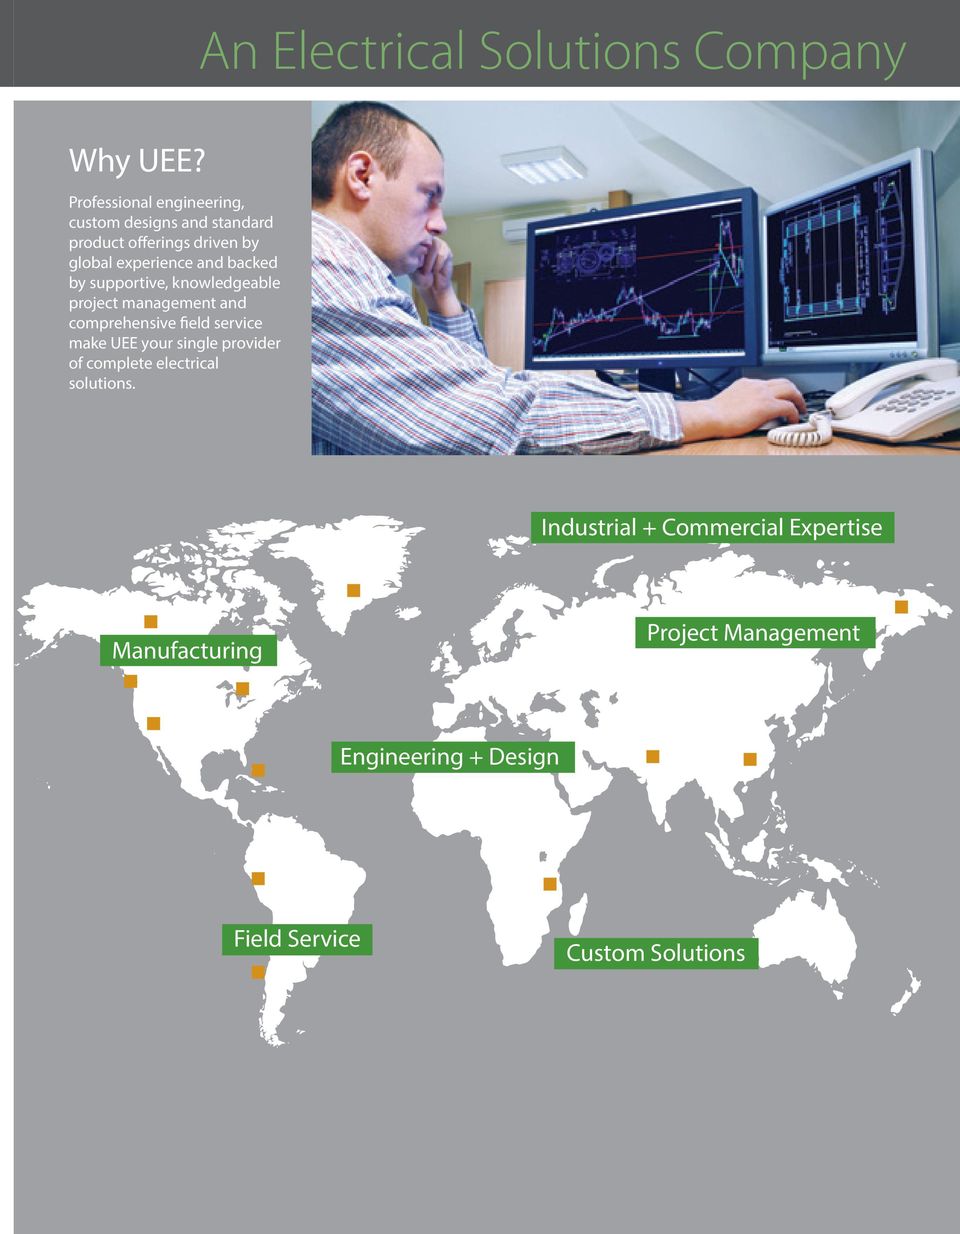 backed by supportive, knowledgeable project management and comprehensive field service make UEE your